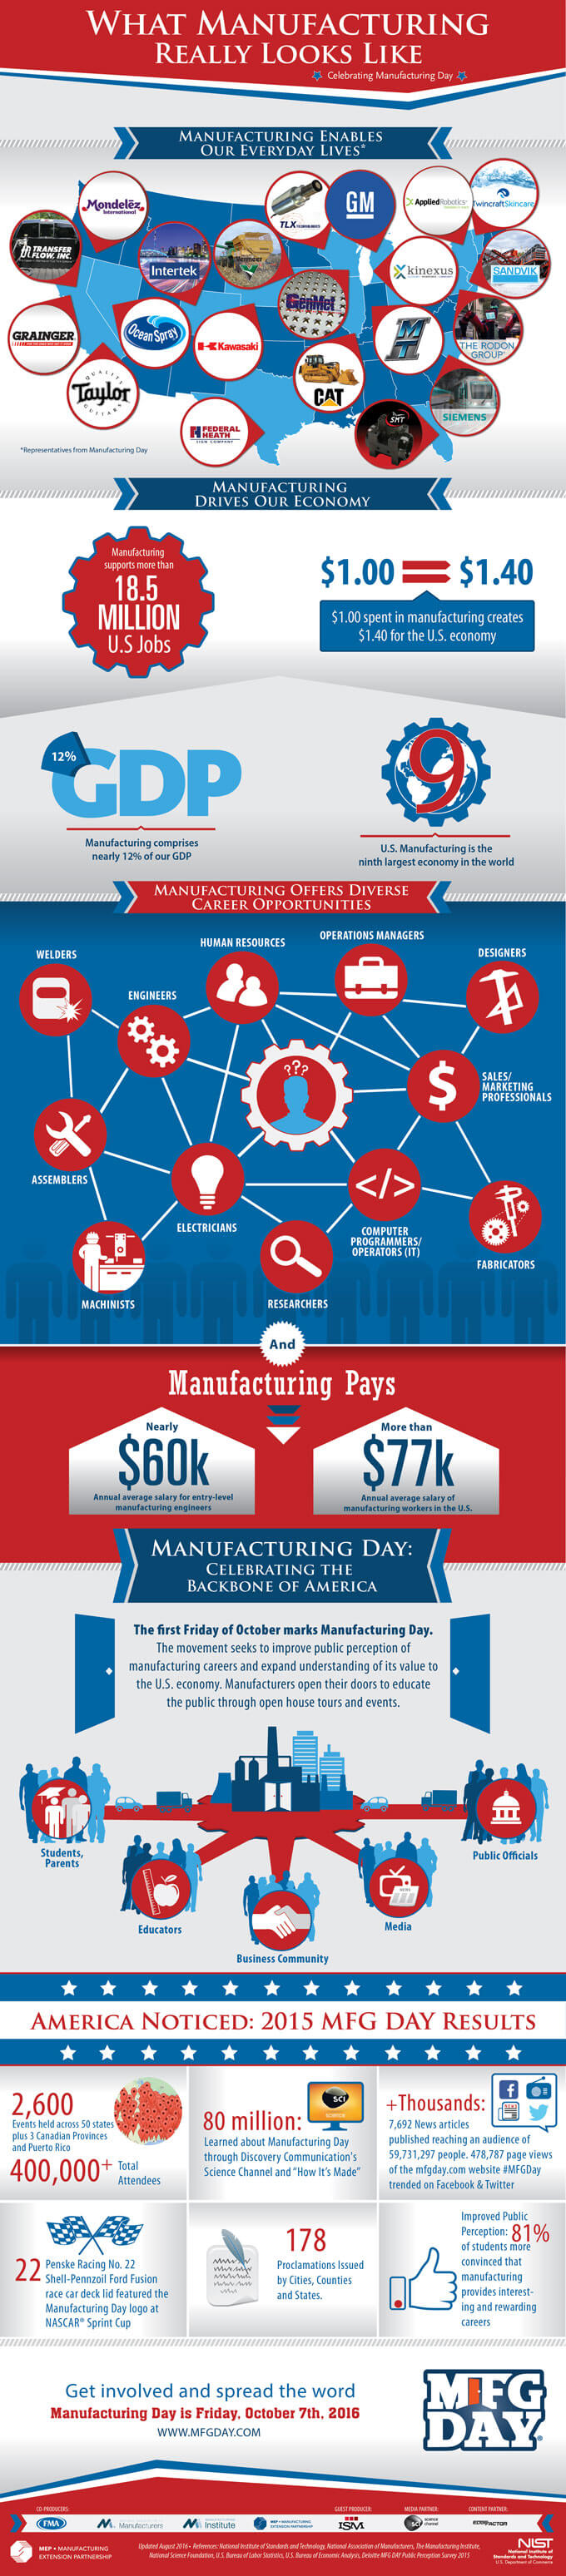 What Manufacturing Really Looks Like Infographic